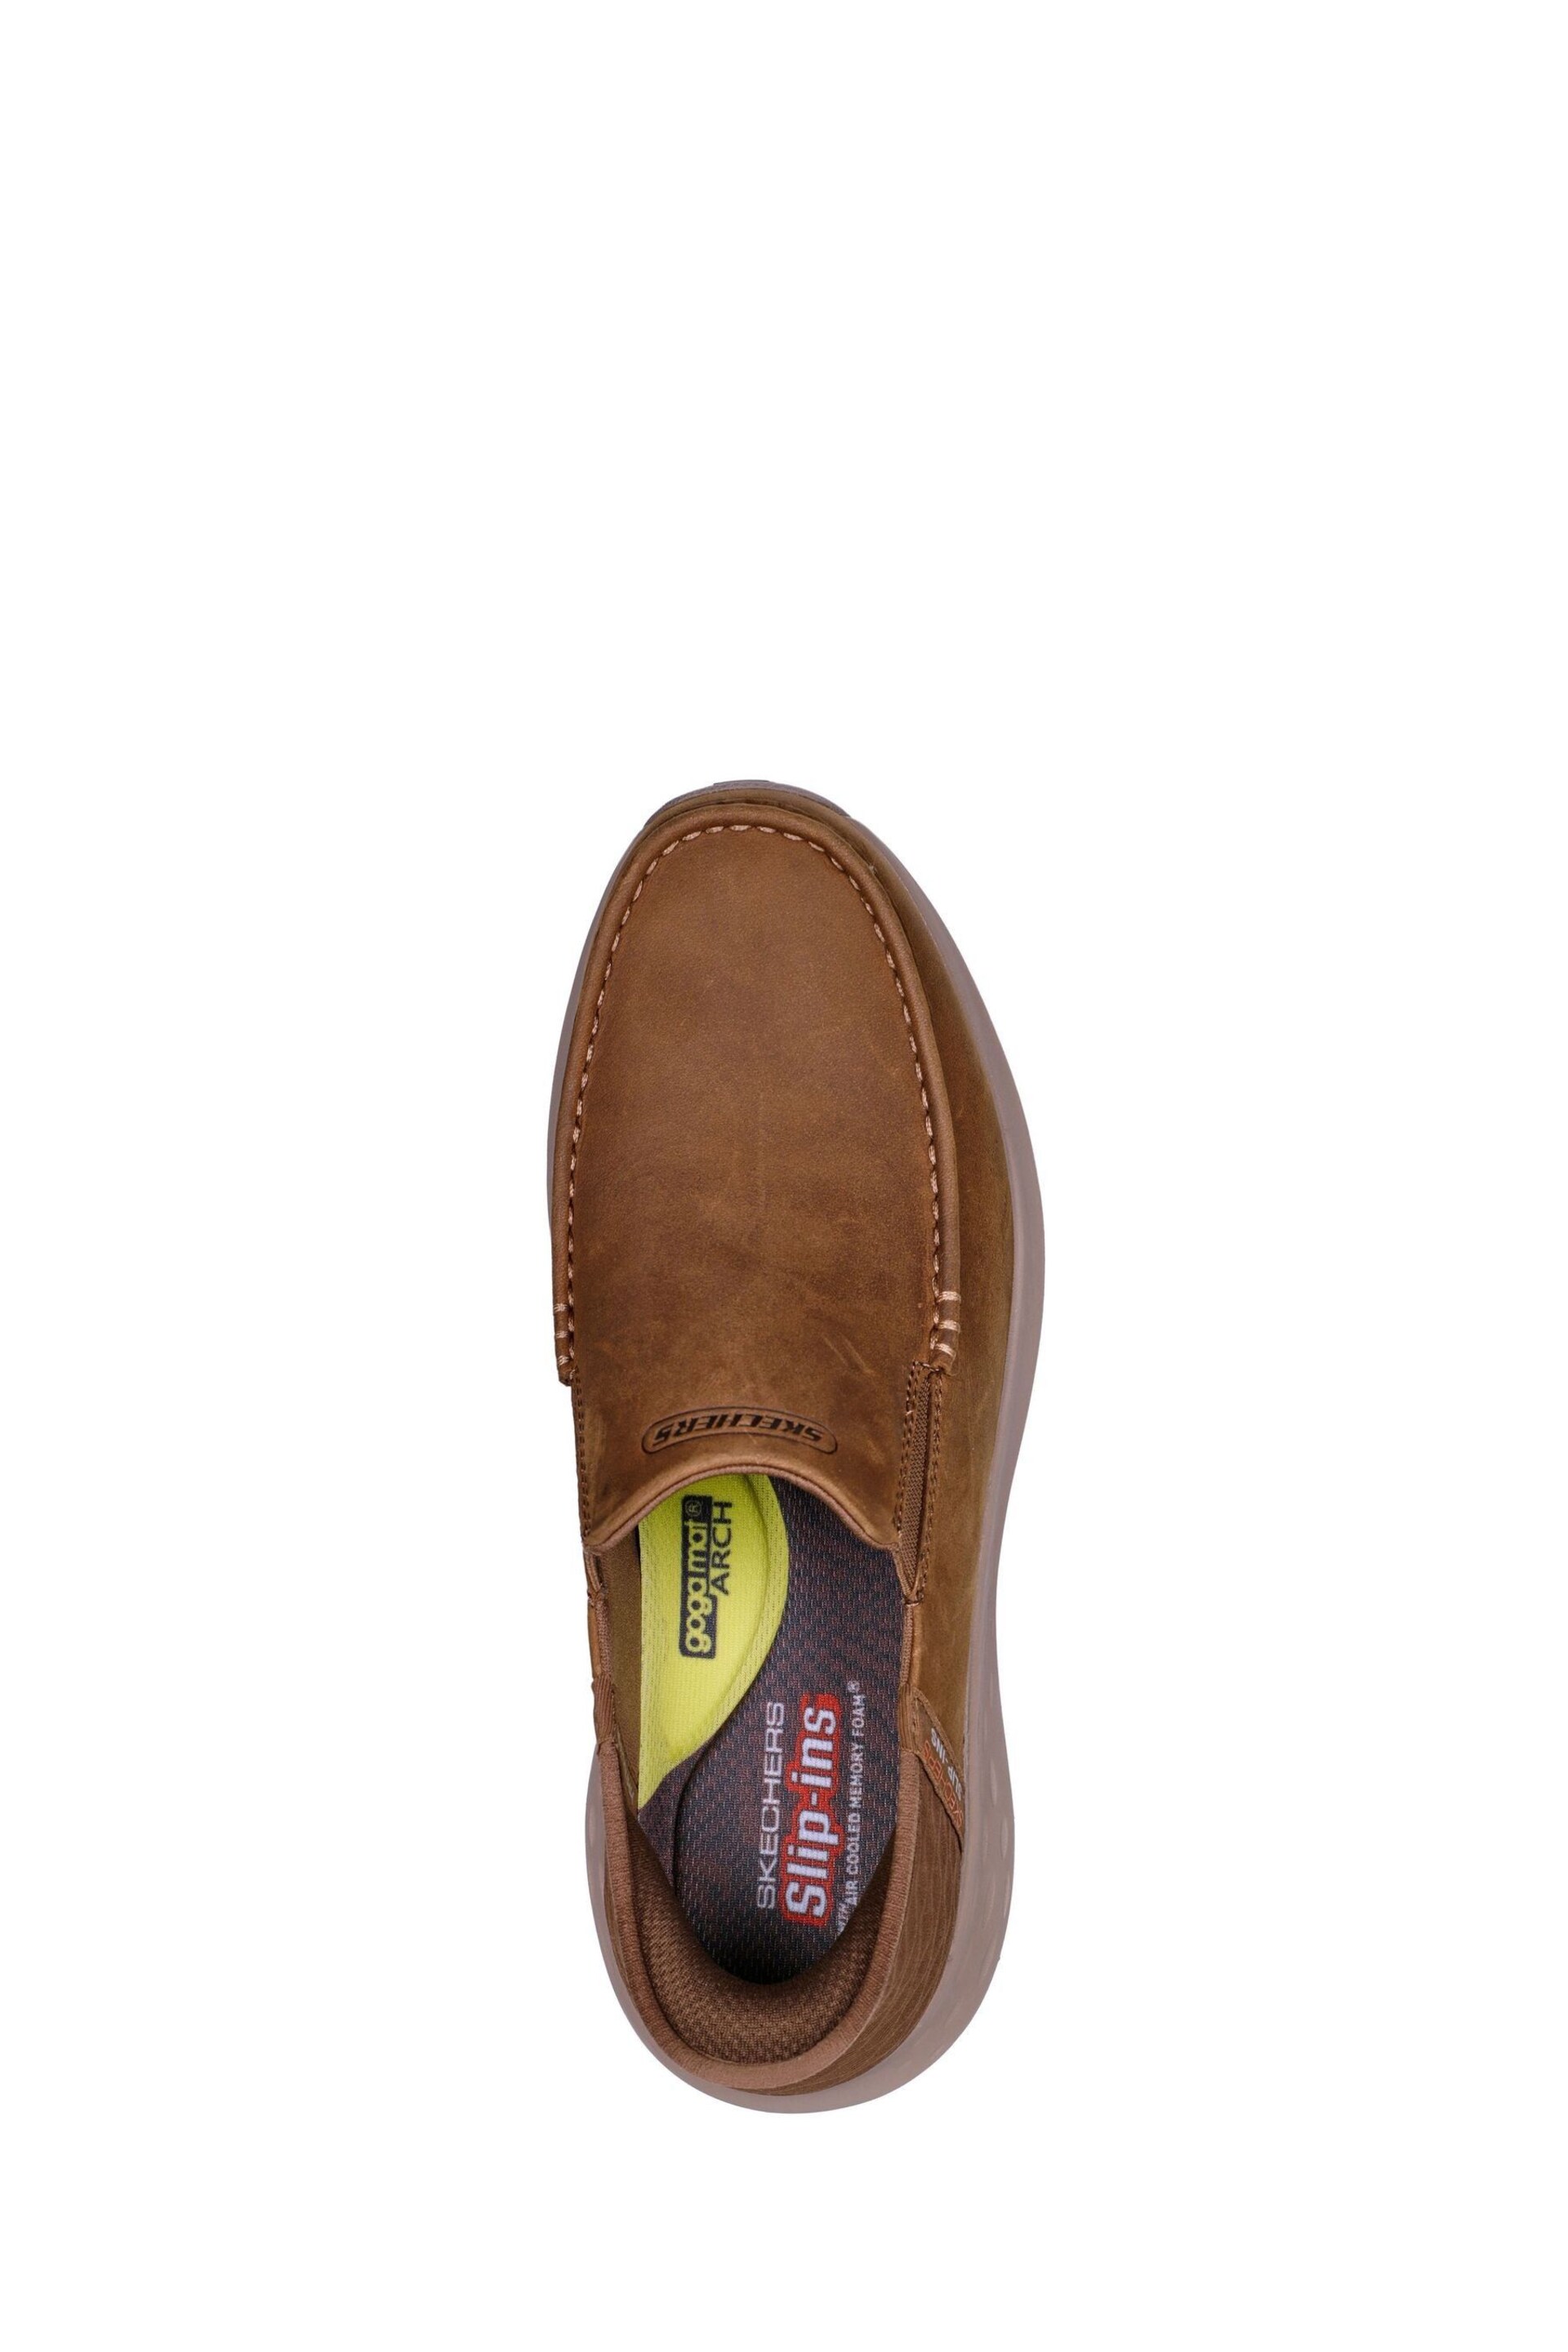 Skechers Brown Parson Oswin Shoes - Image 5 of 6